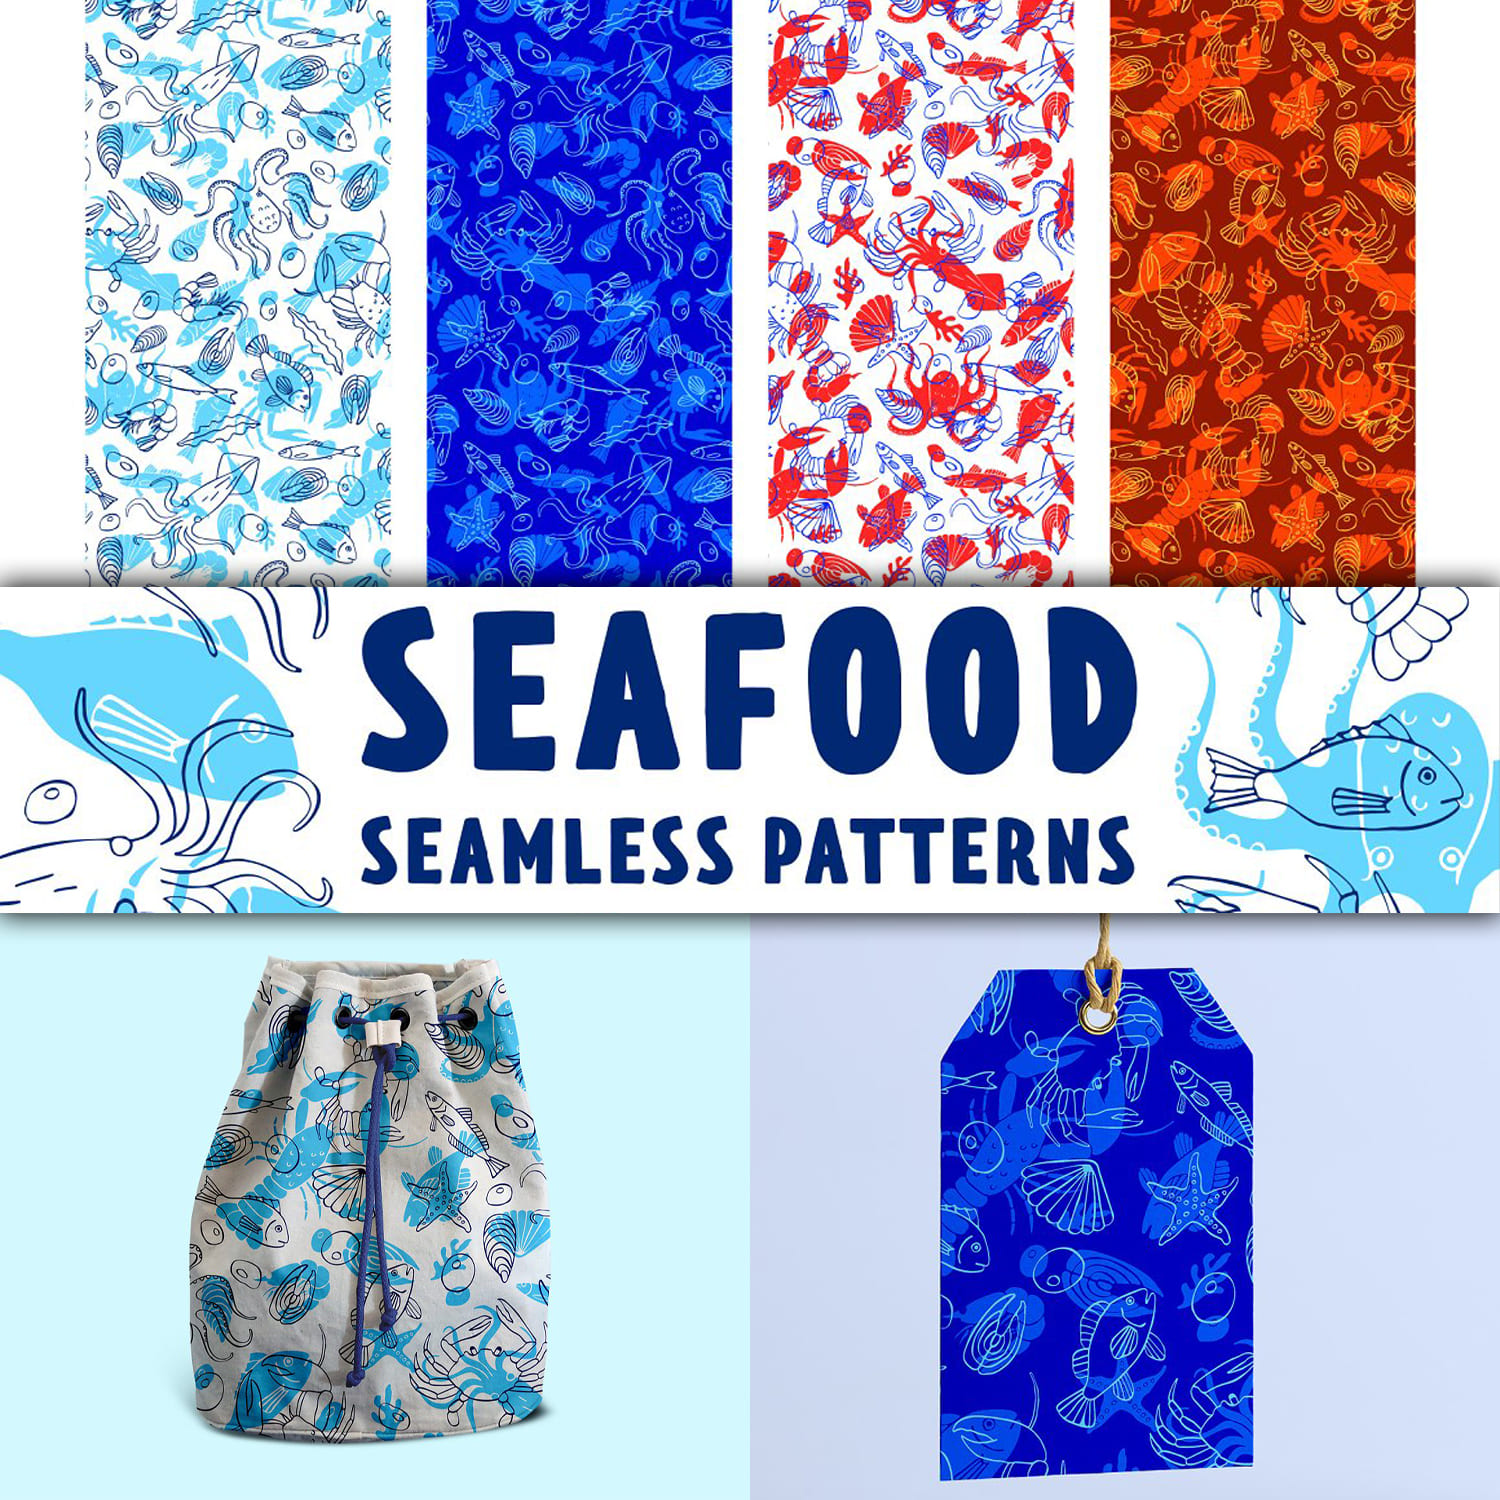 Seafood Patterns cover image.